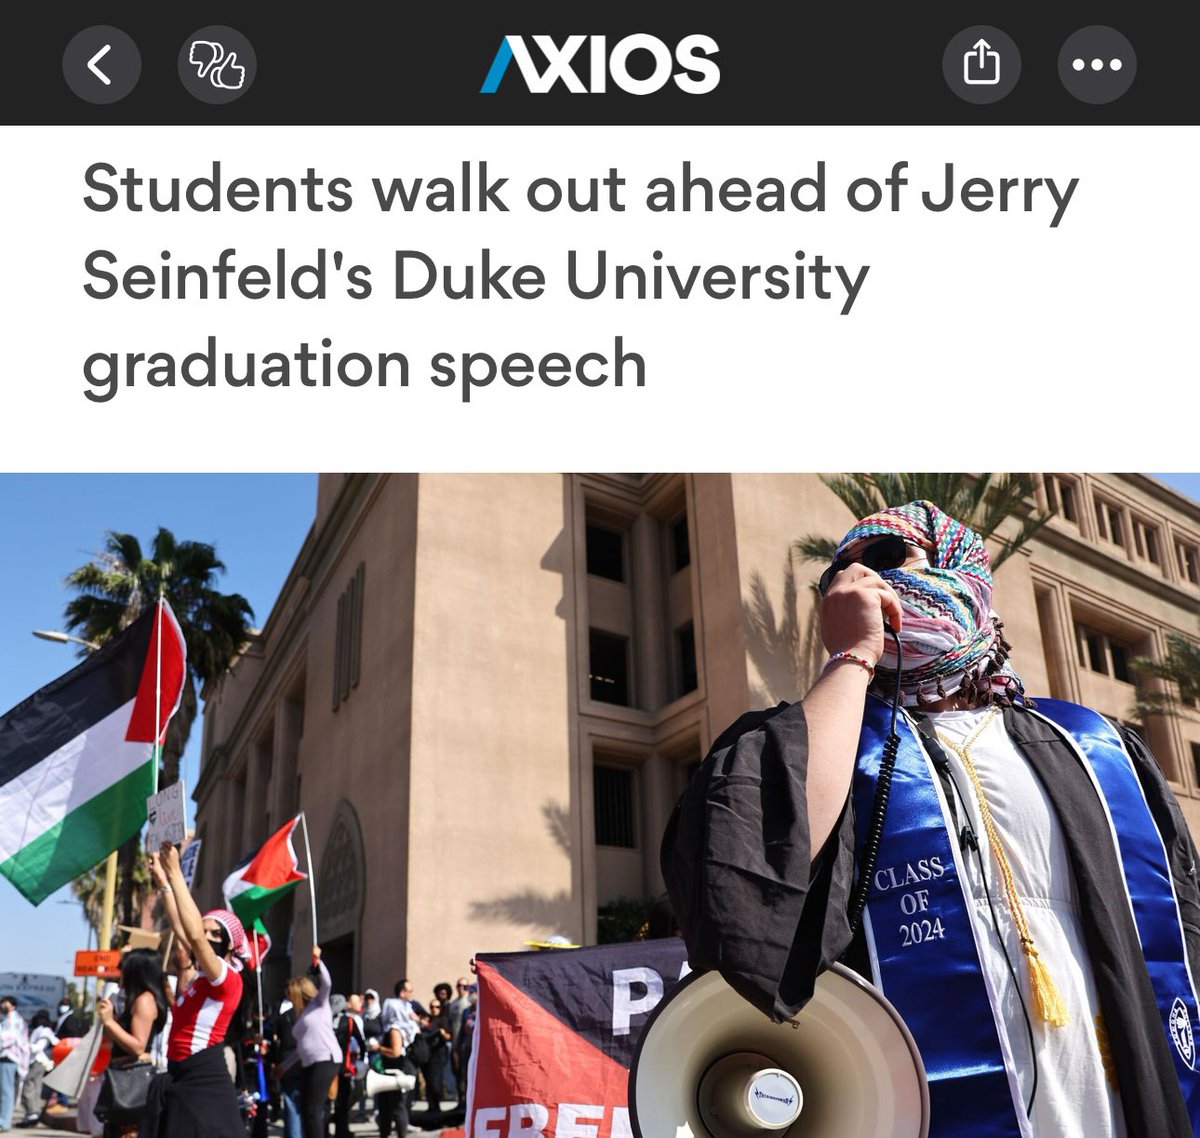 30 out of 7,000 students walked out.

That’s 0.43%.

Why does the media habitually platform this fringe?

Guaranteed coverage is the nicotine to the pup tent campus intifada and Hamas salutes them all.